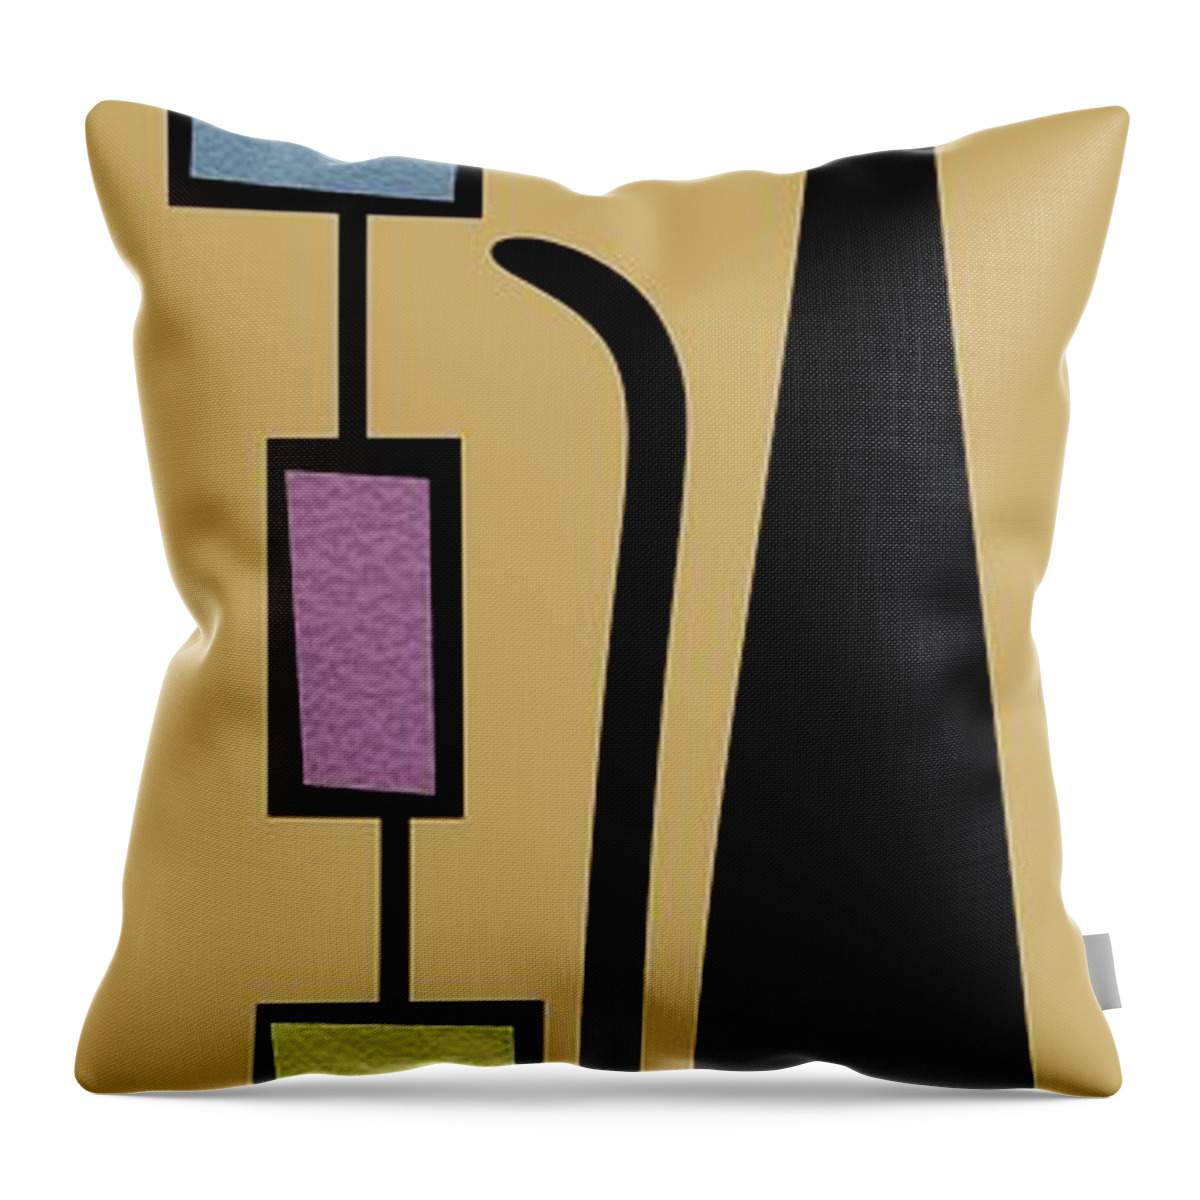 Cat Throw Pillow featuring the digital art Rectangle Cat 3 by Donna Mibus